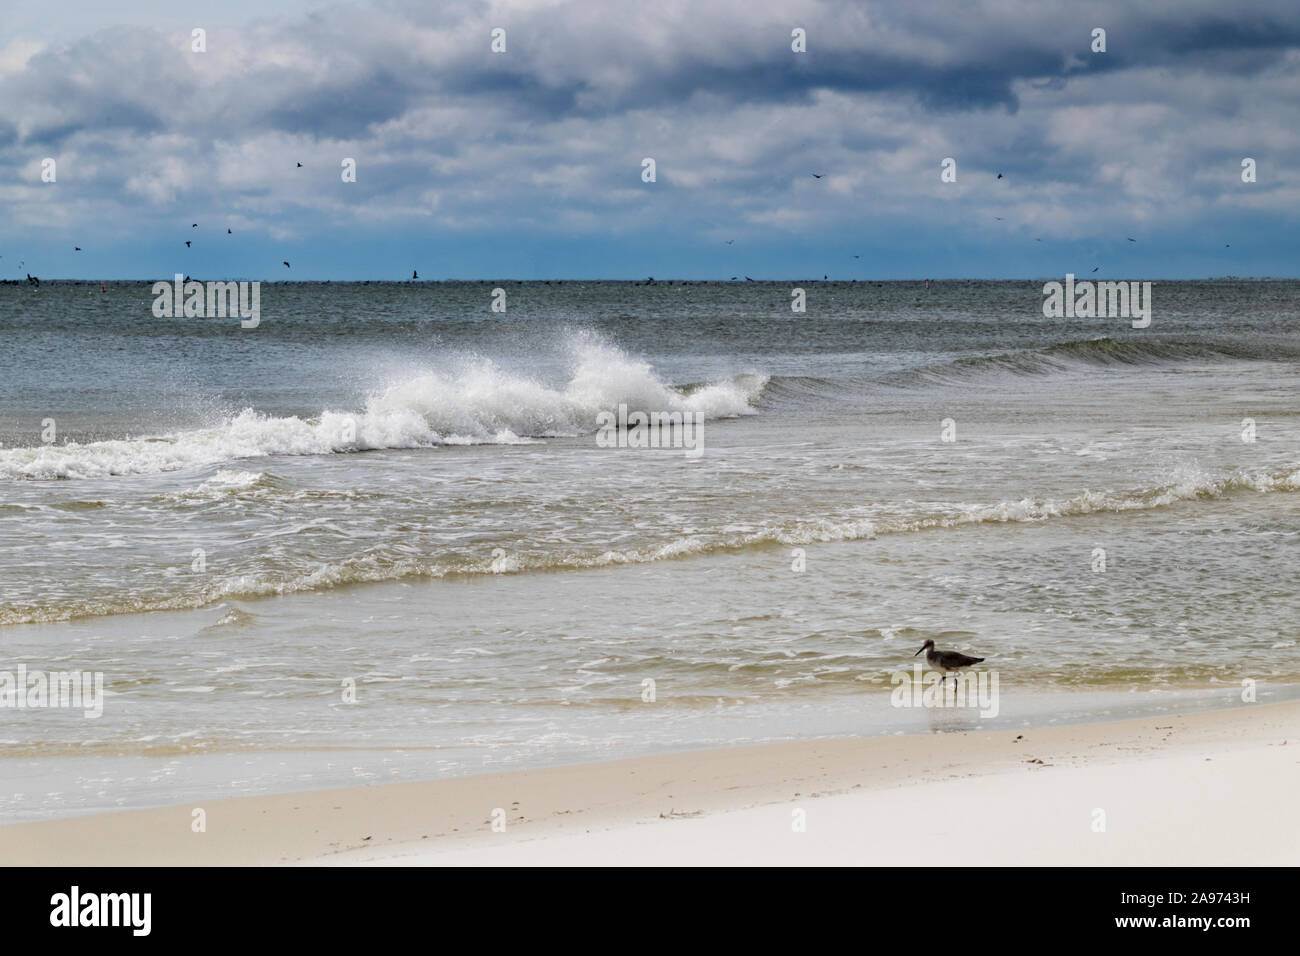 Sandpiper wades in shallow water as wind-swept waves rush to the beach at Gulf Shores, Alabama, USA. Stock Photo